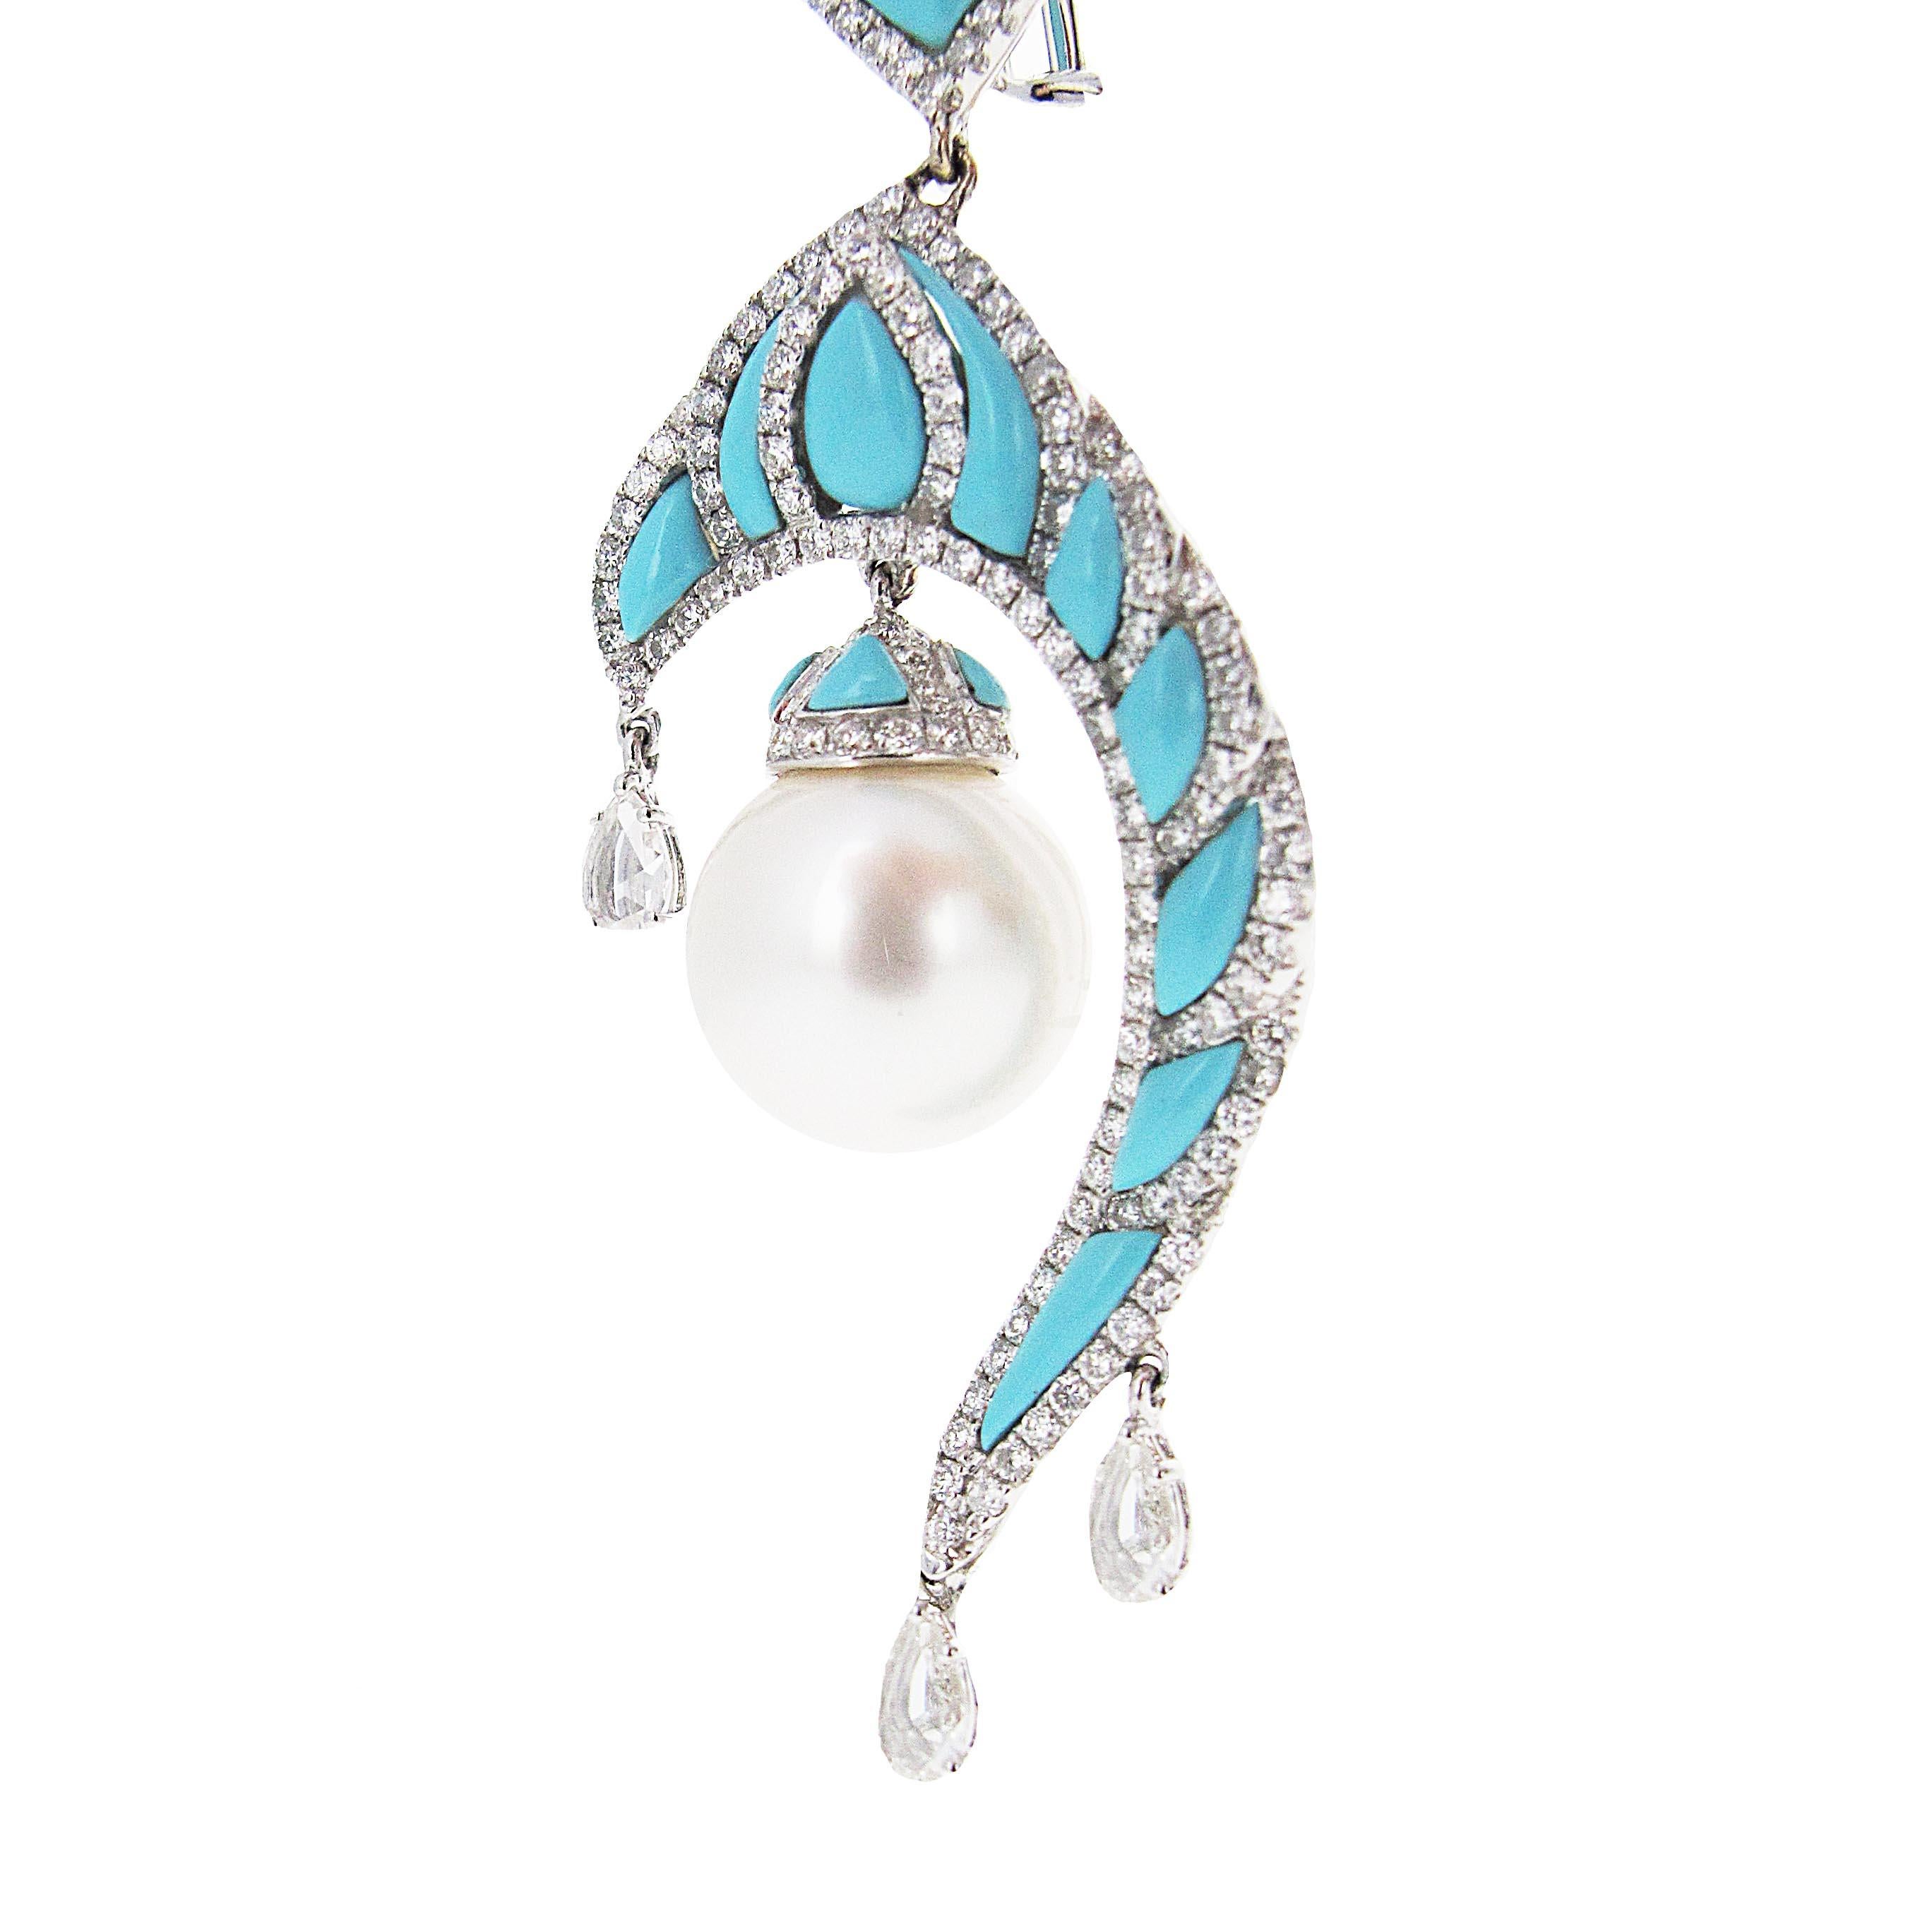 Look like a real princess. These 18k white gold turquoise, pearl and diamond earrings are extremely unique. We have only seen one other pair in pink (see other listing). These dangle beautifully below the ear and have such nice detail. There is a